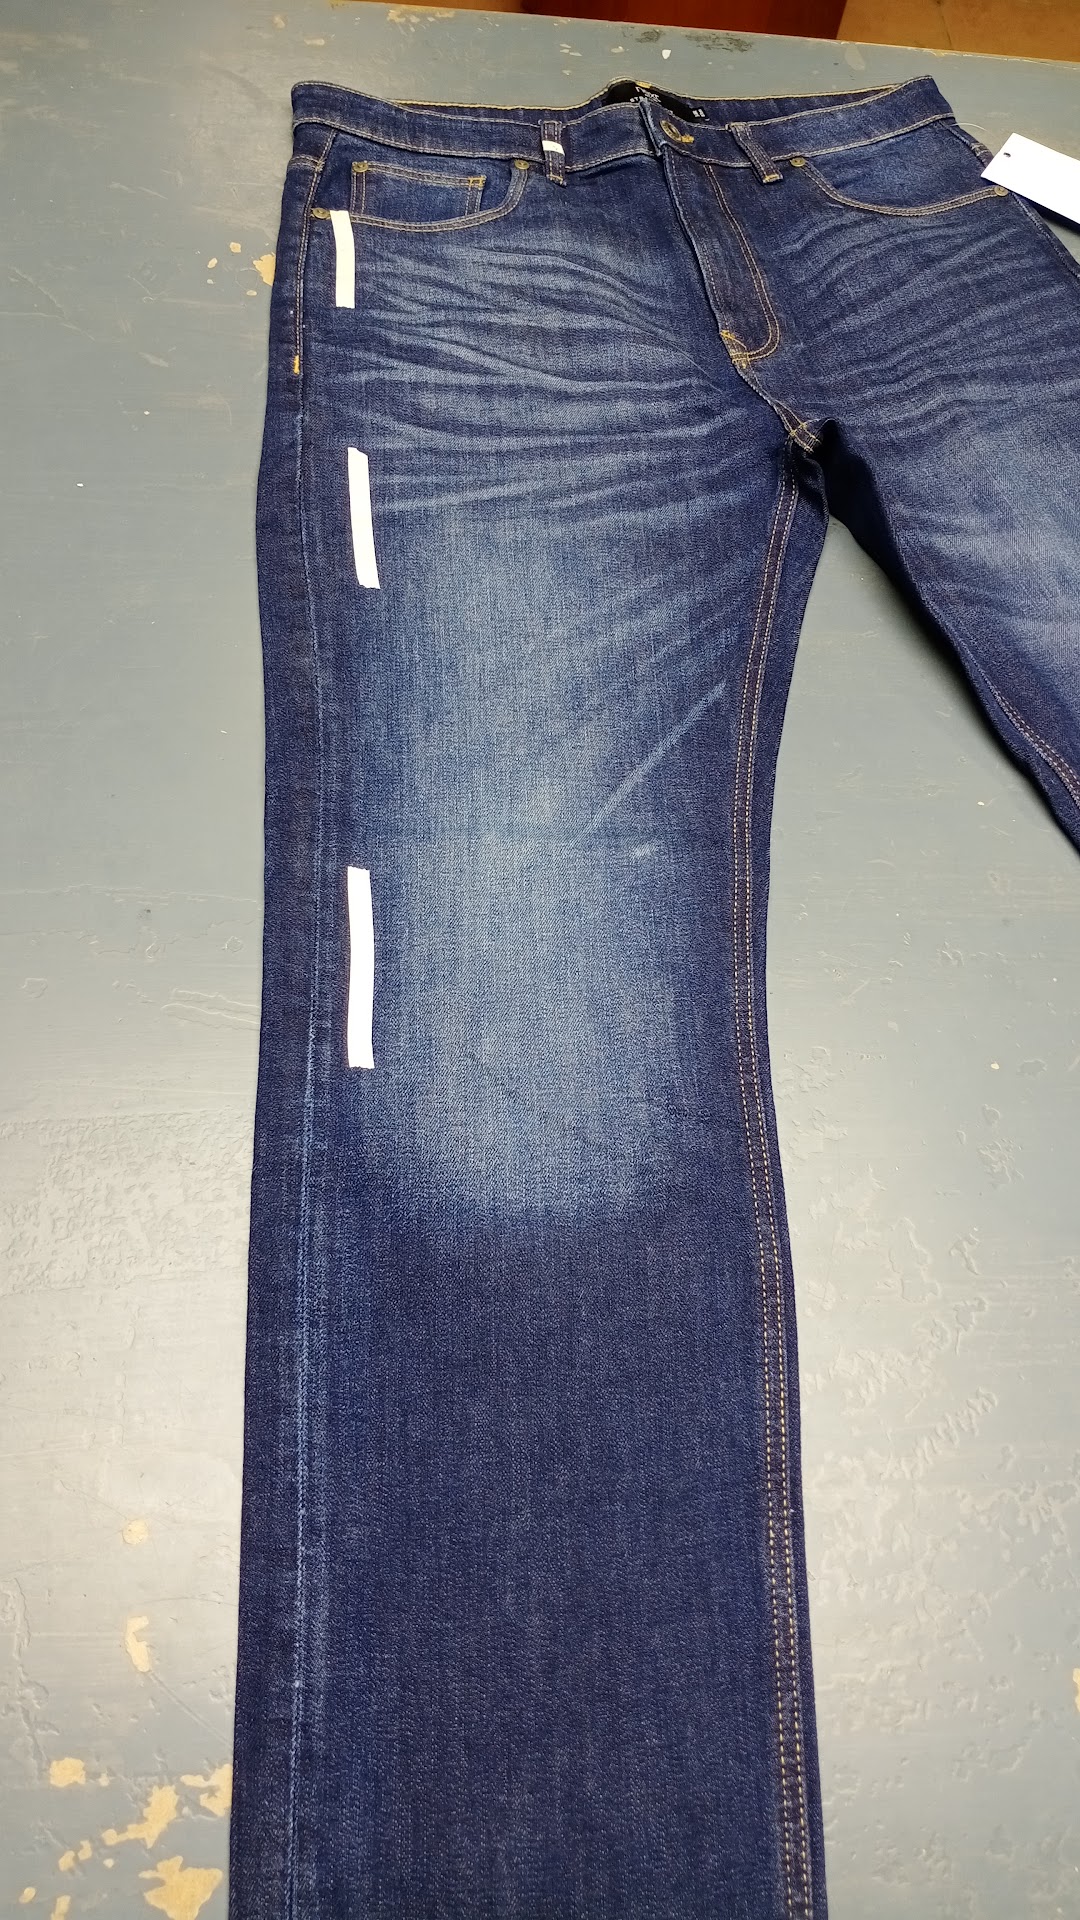 Casual Sports Wear Manufacture & Exporter of Jeans Wear